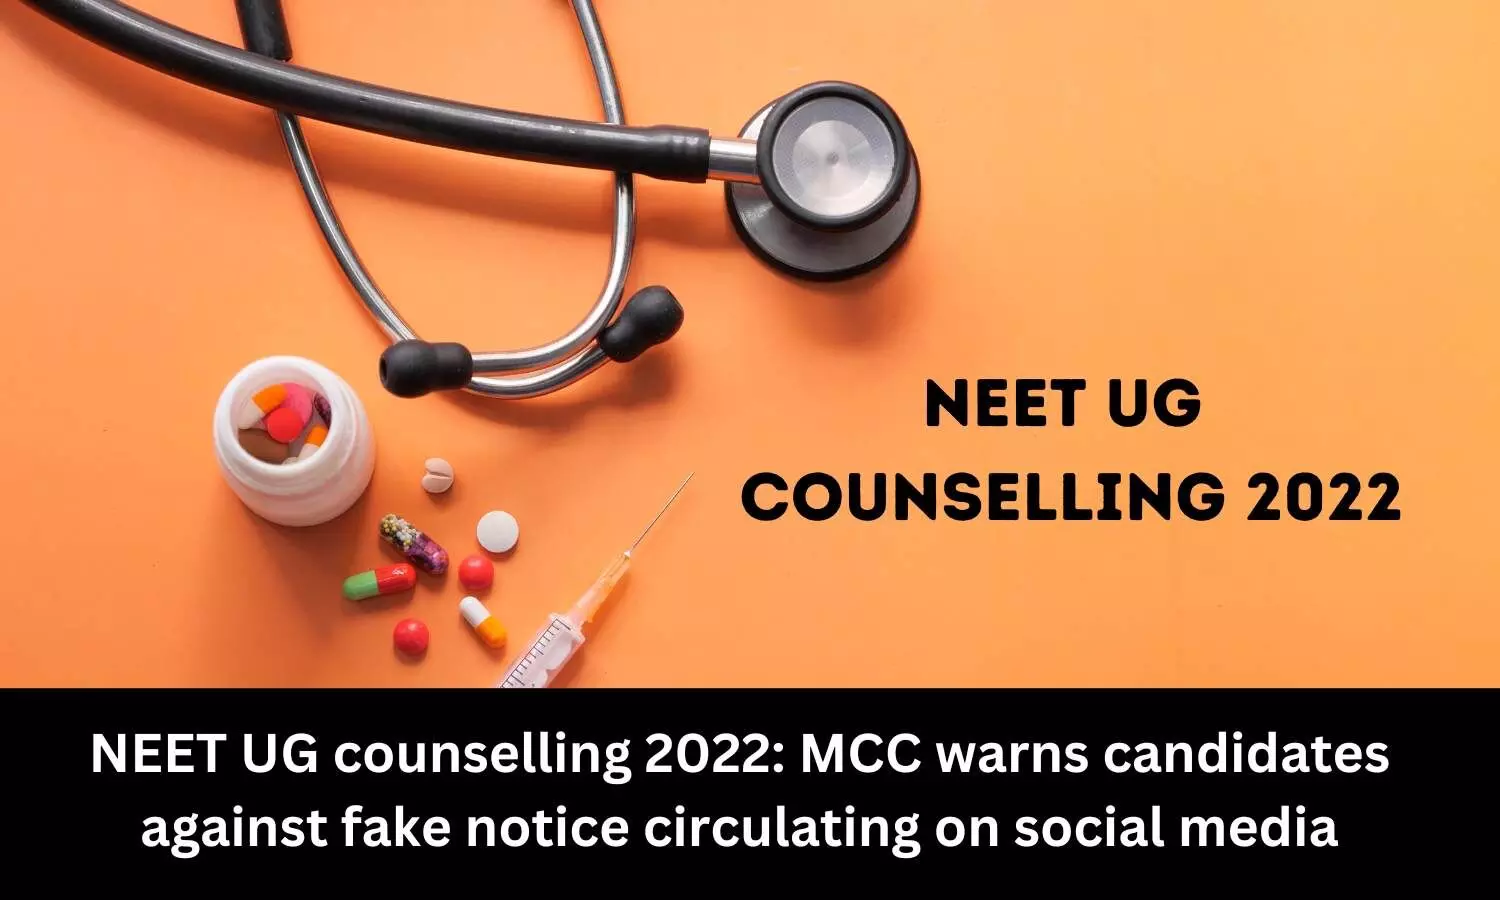 NEET UG counselling 2022: MCC warns candidates against fake notice circulating on social media